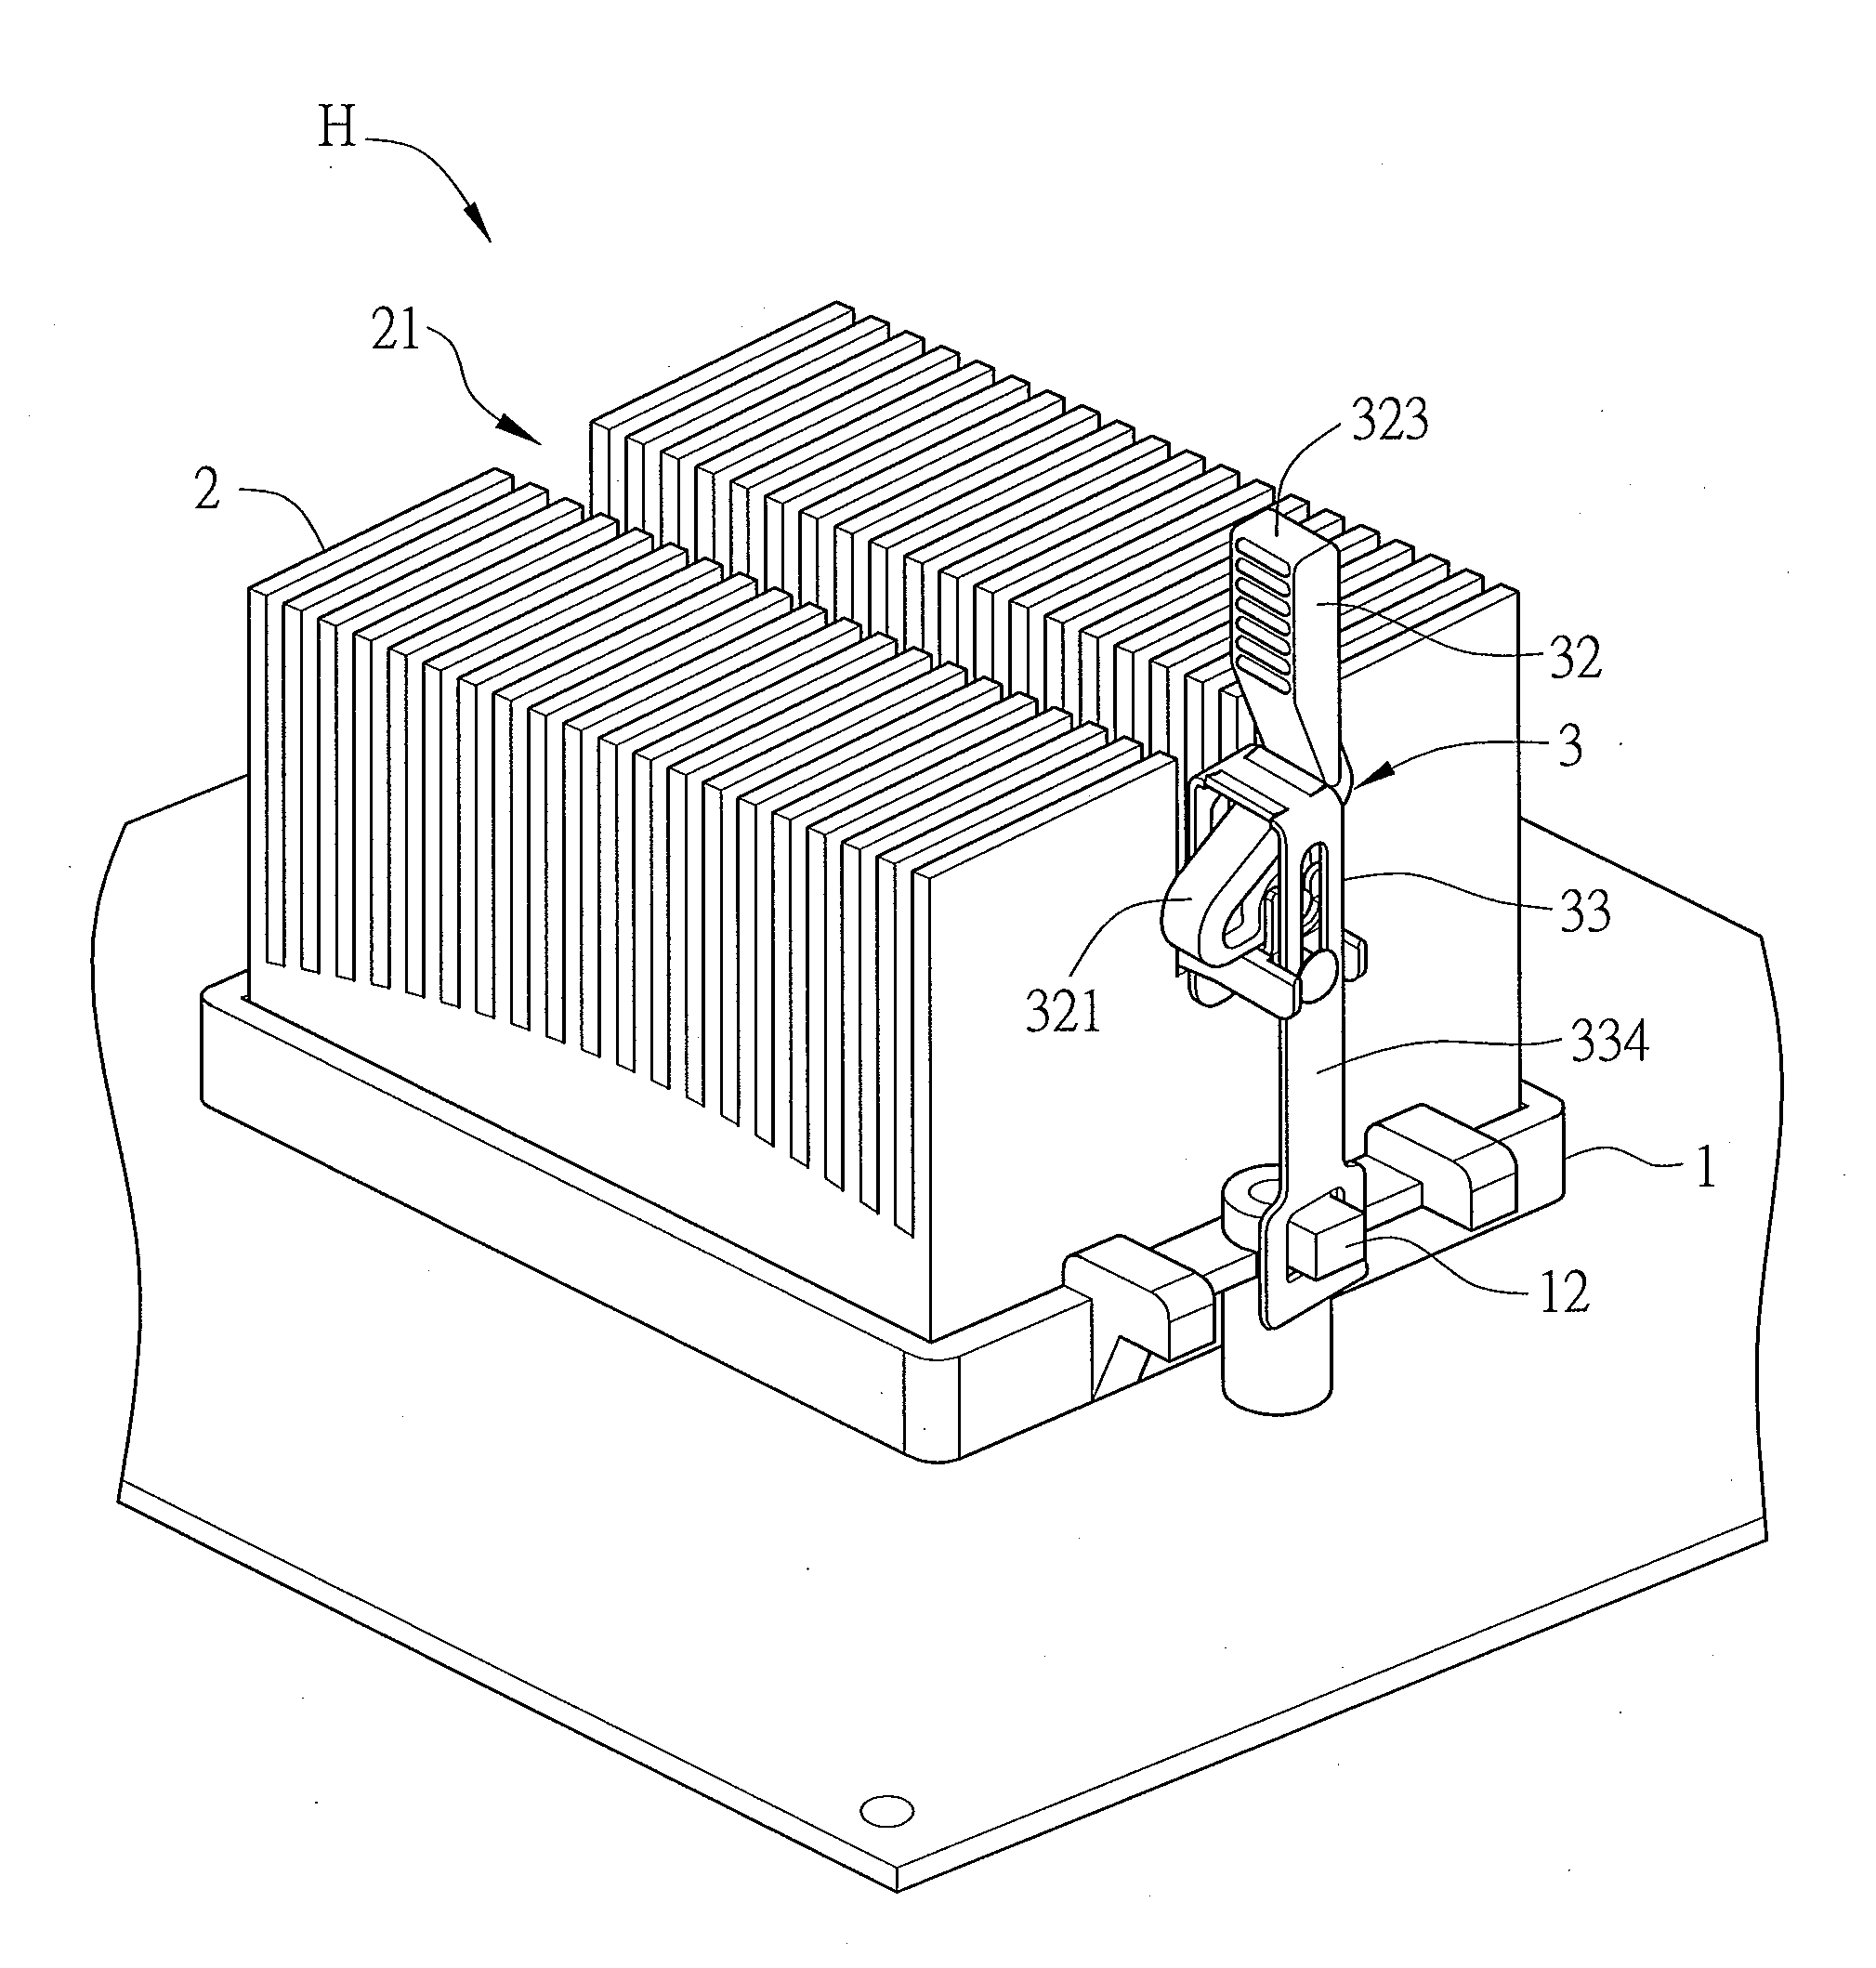 Heat sink assembly and clip thereof